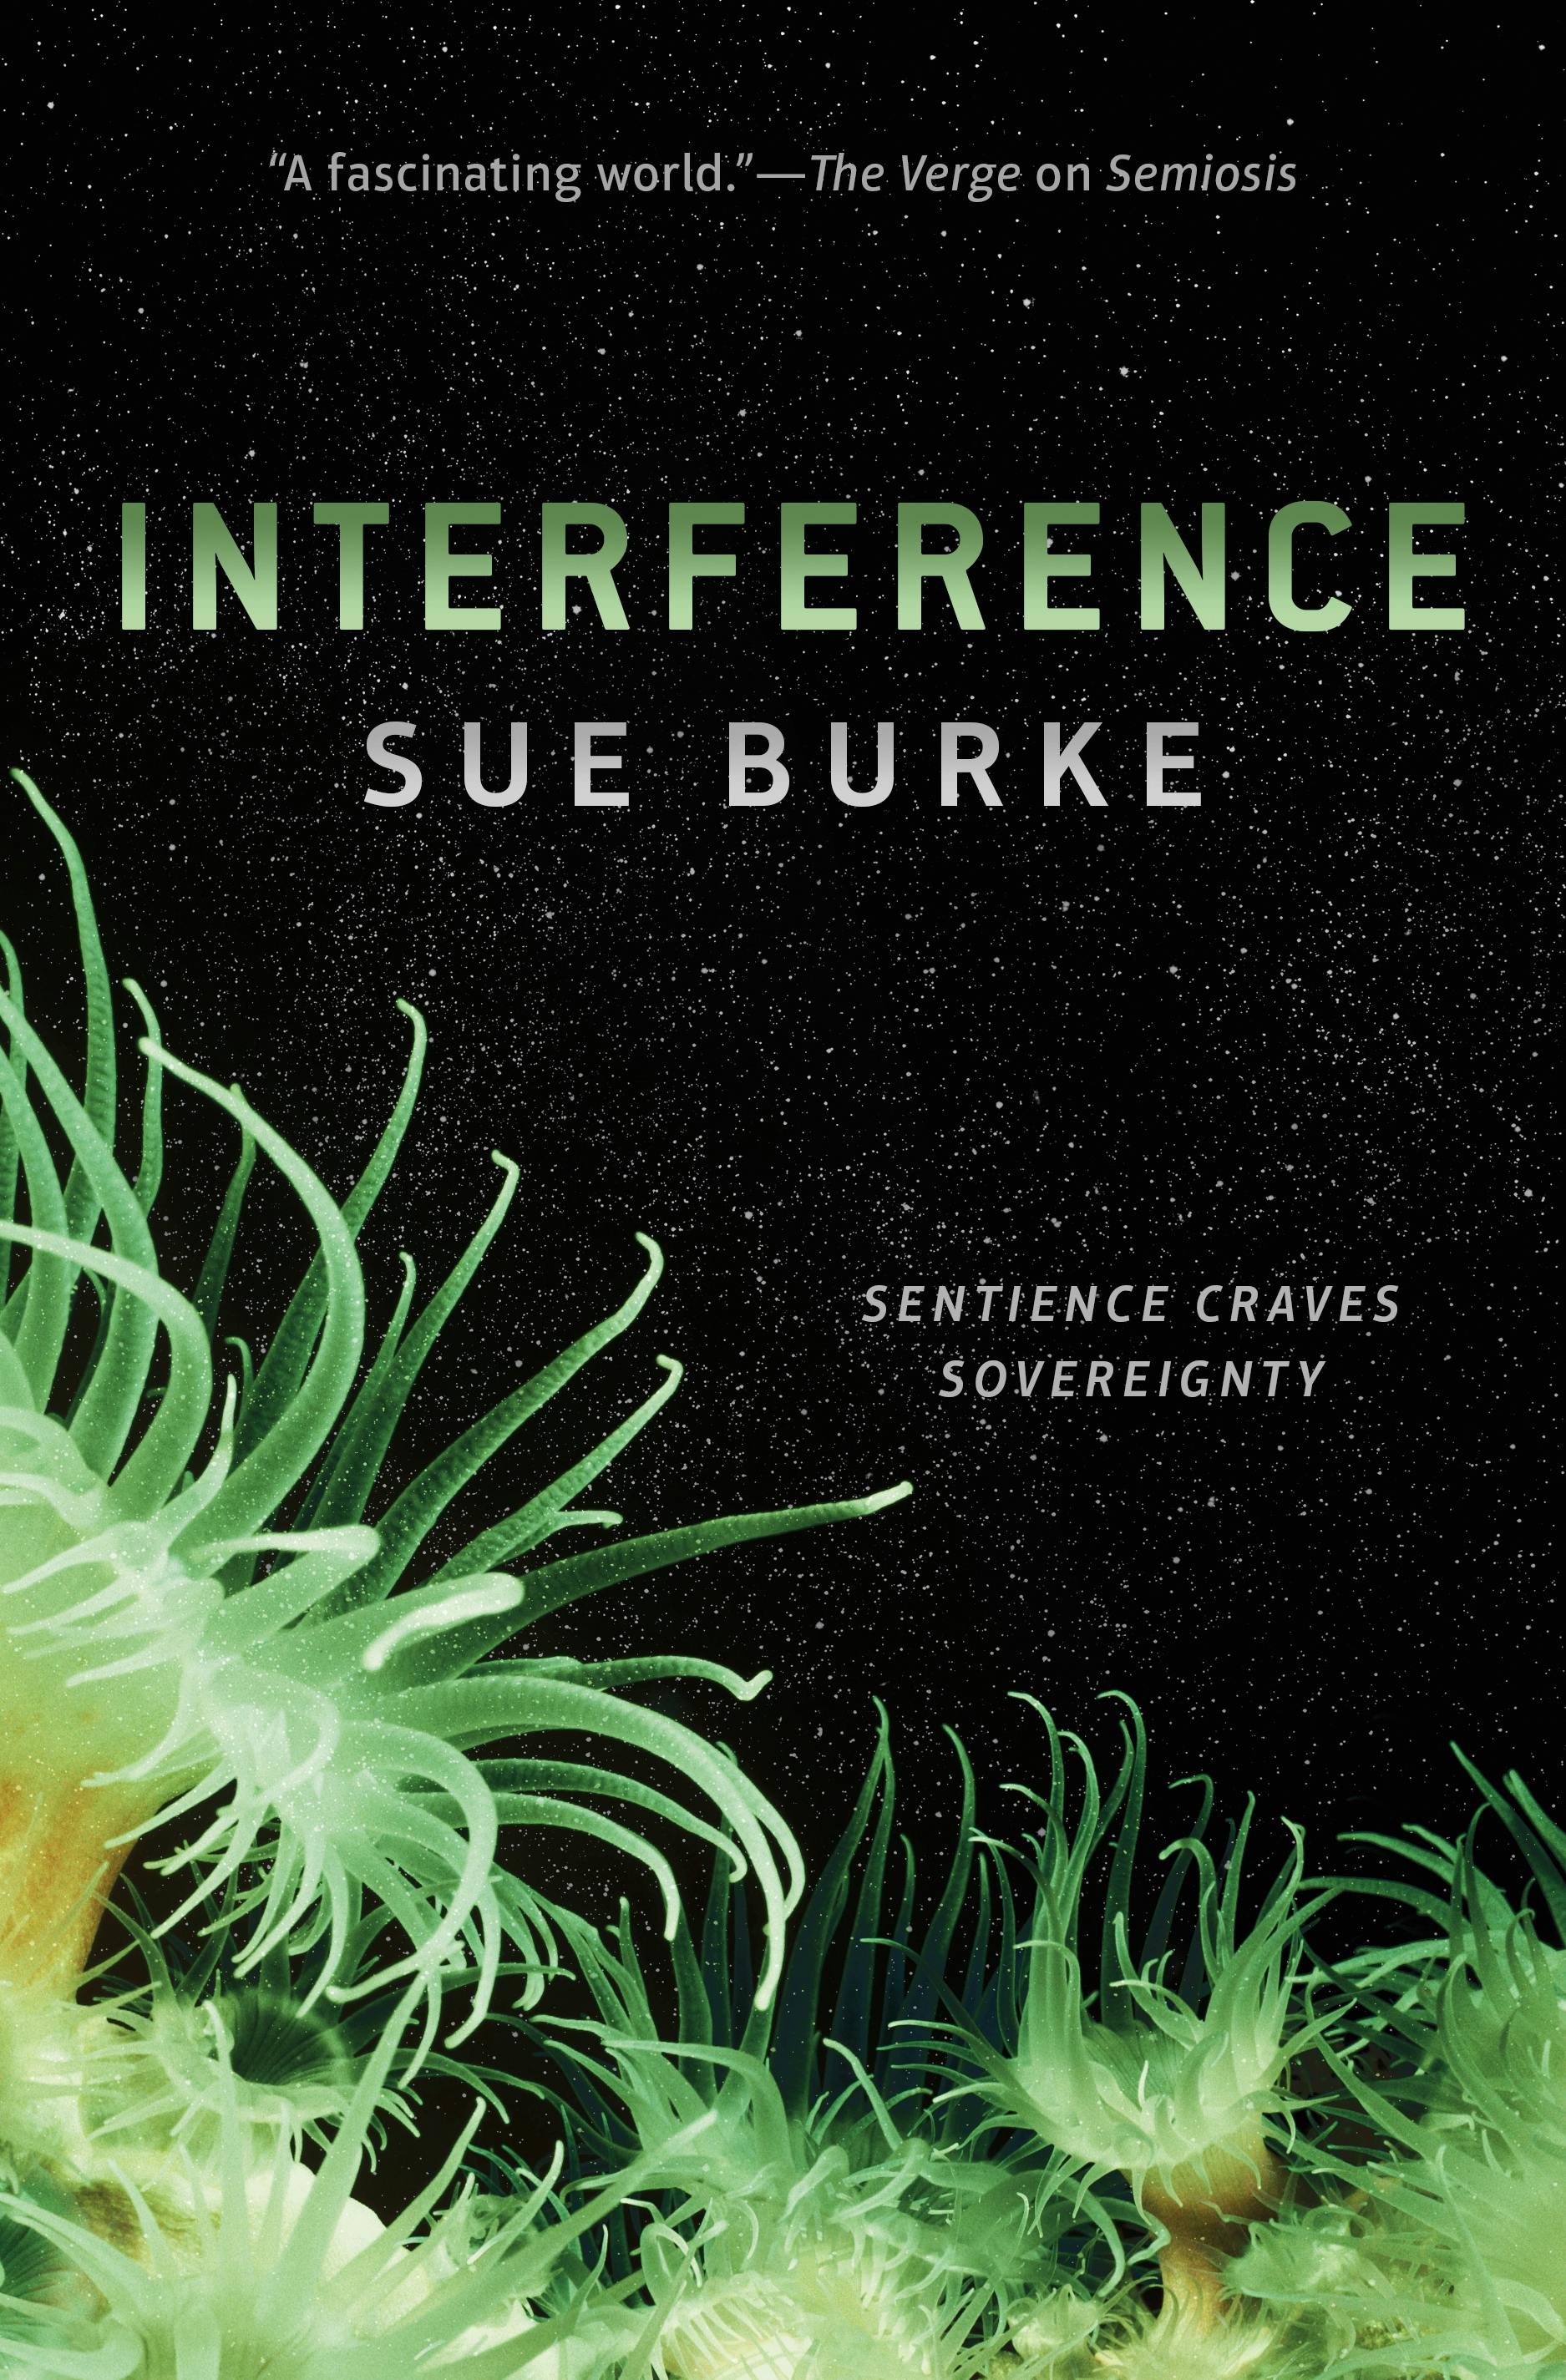 Cover for the book titled as: Interference